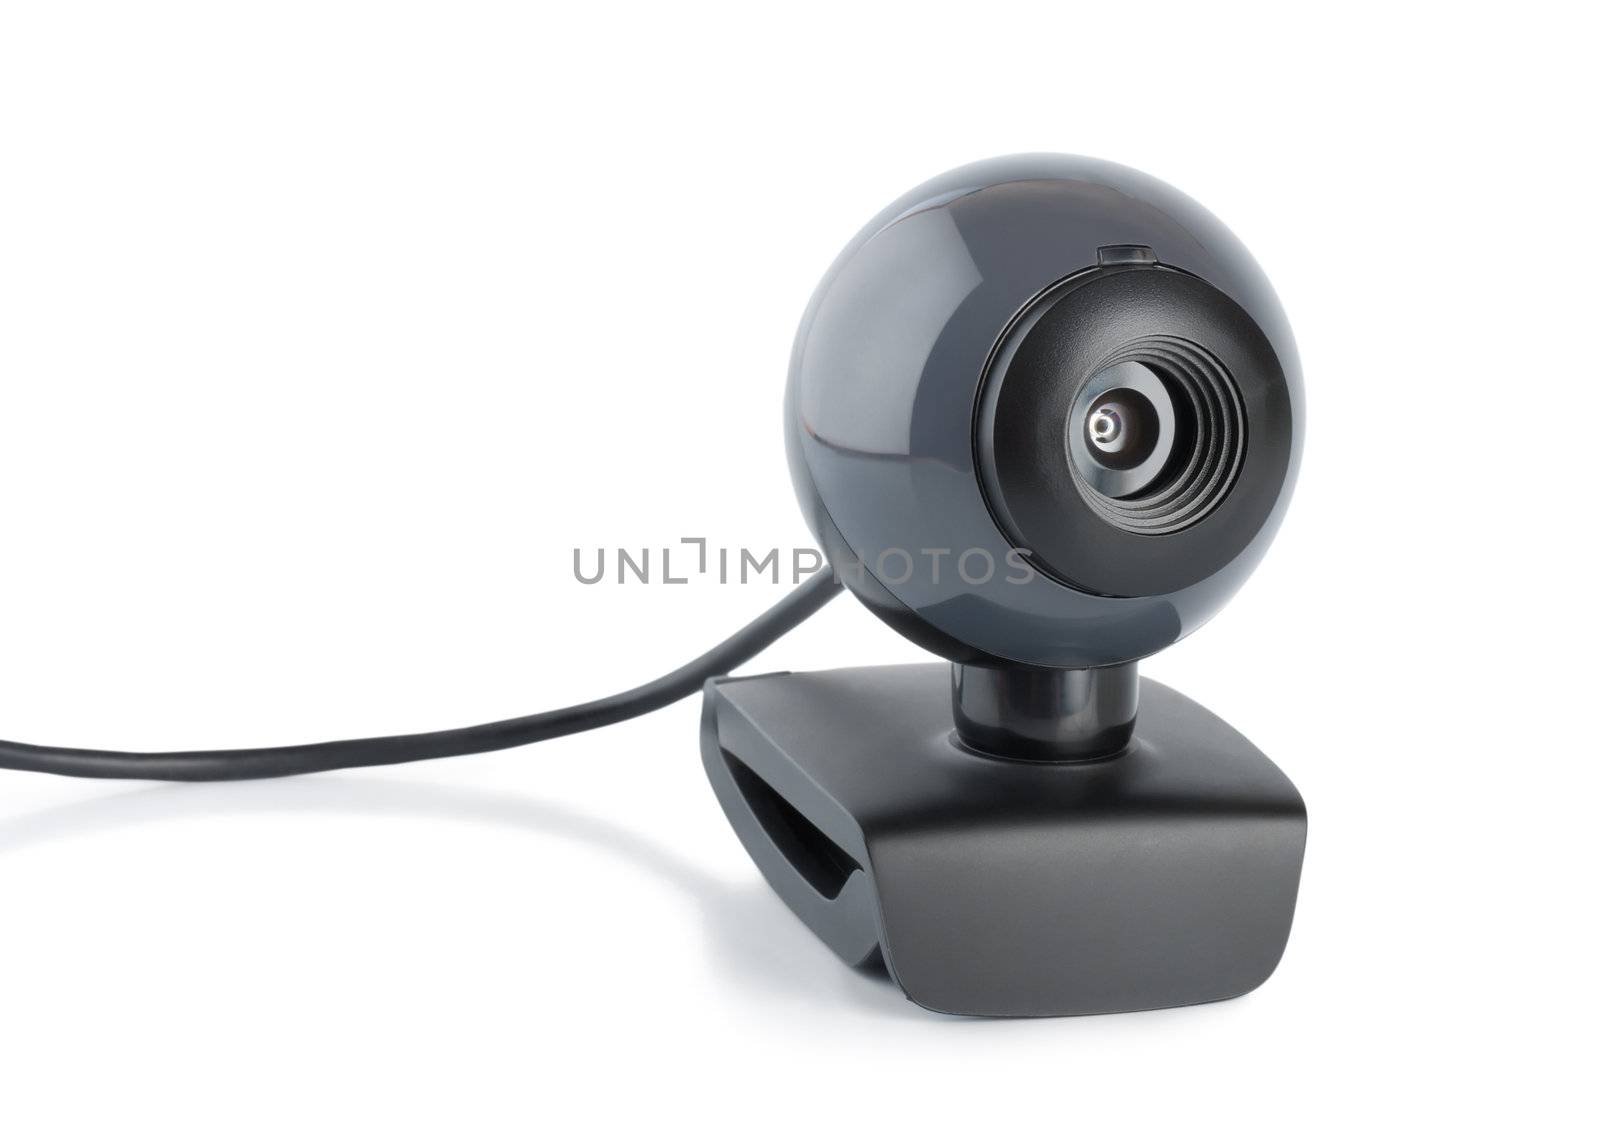 Web camera isolated on a white background